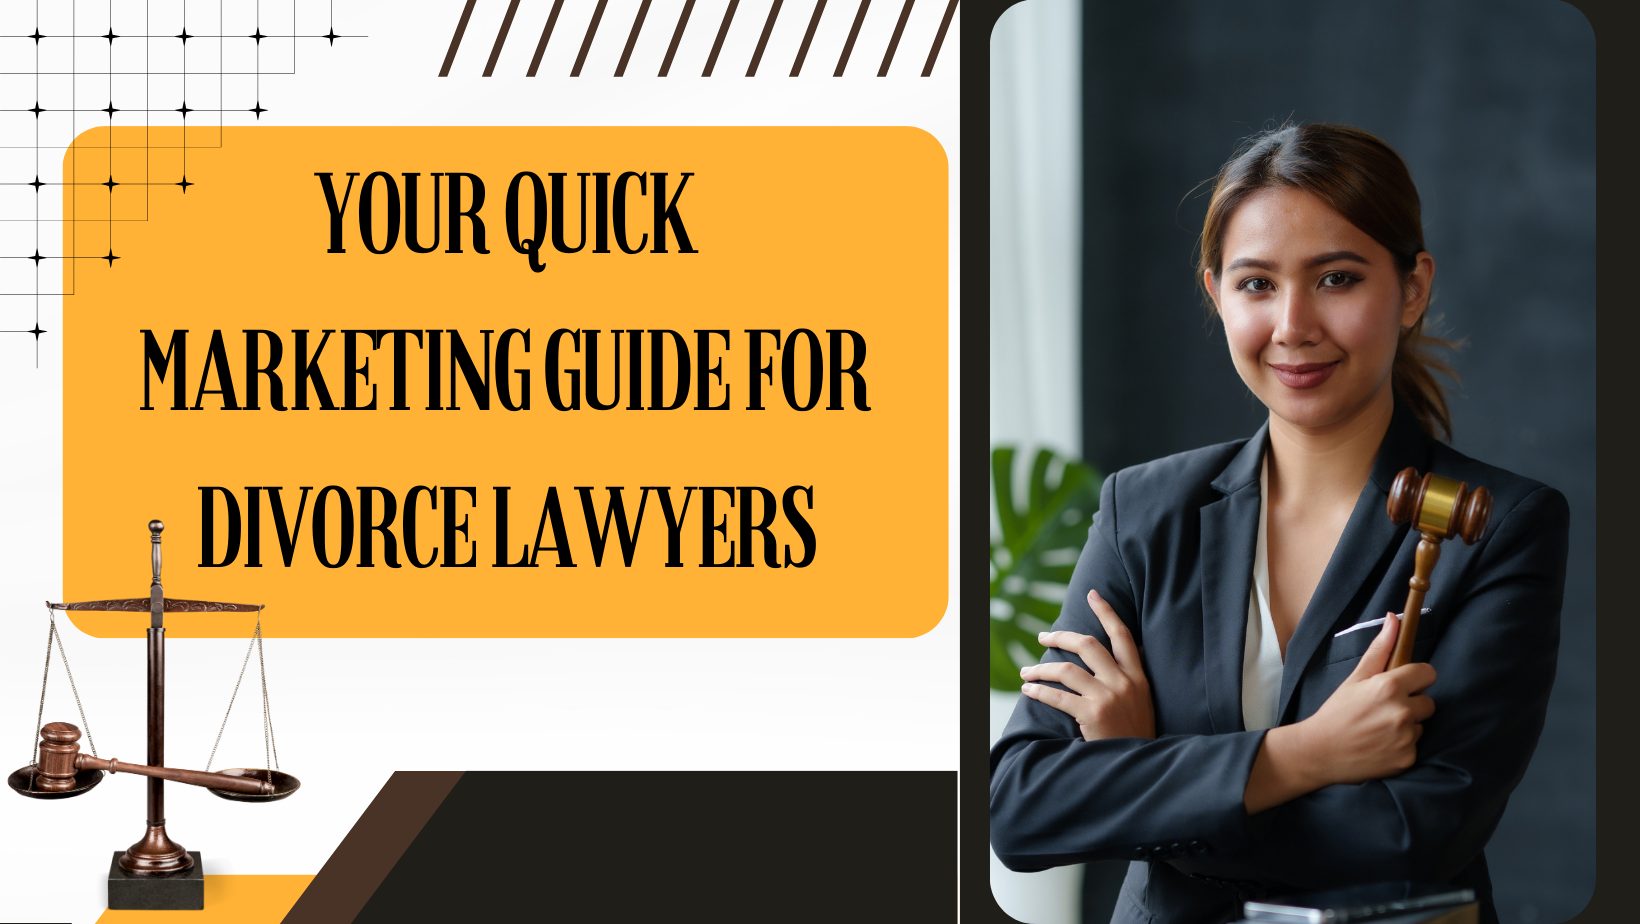 Your quick marketing guide for divorce lawyers 